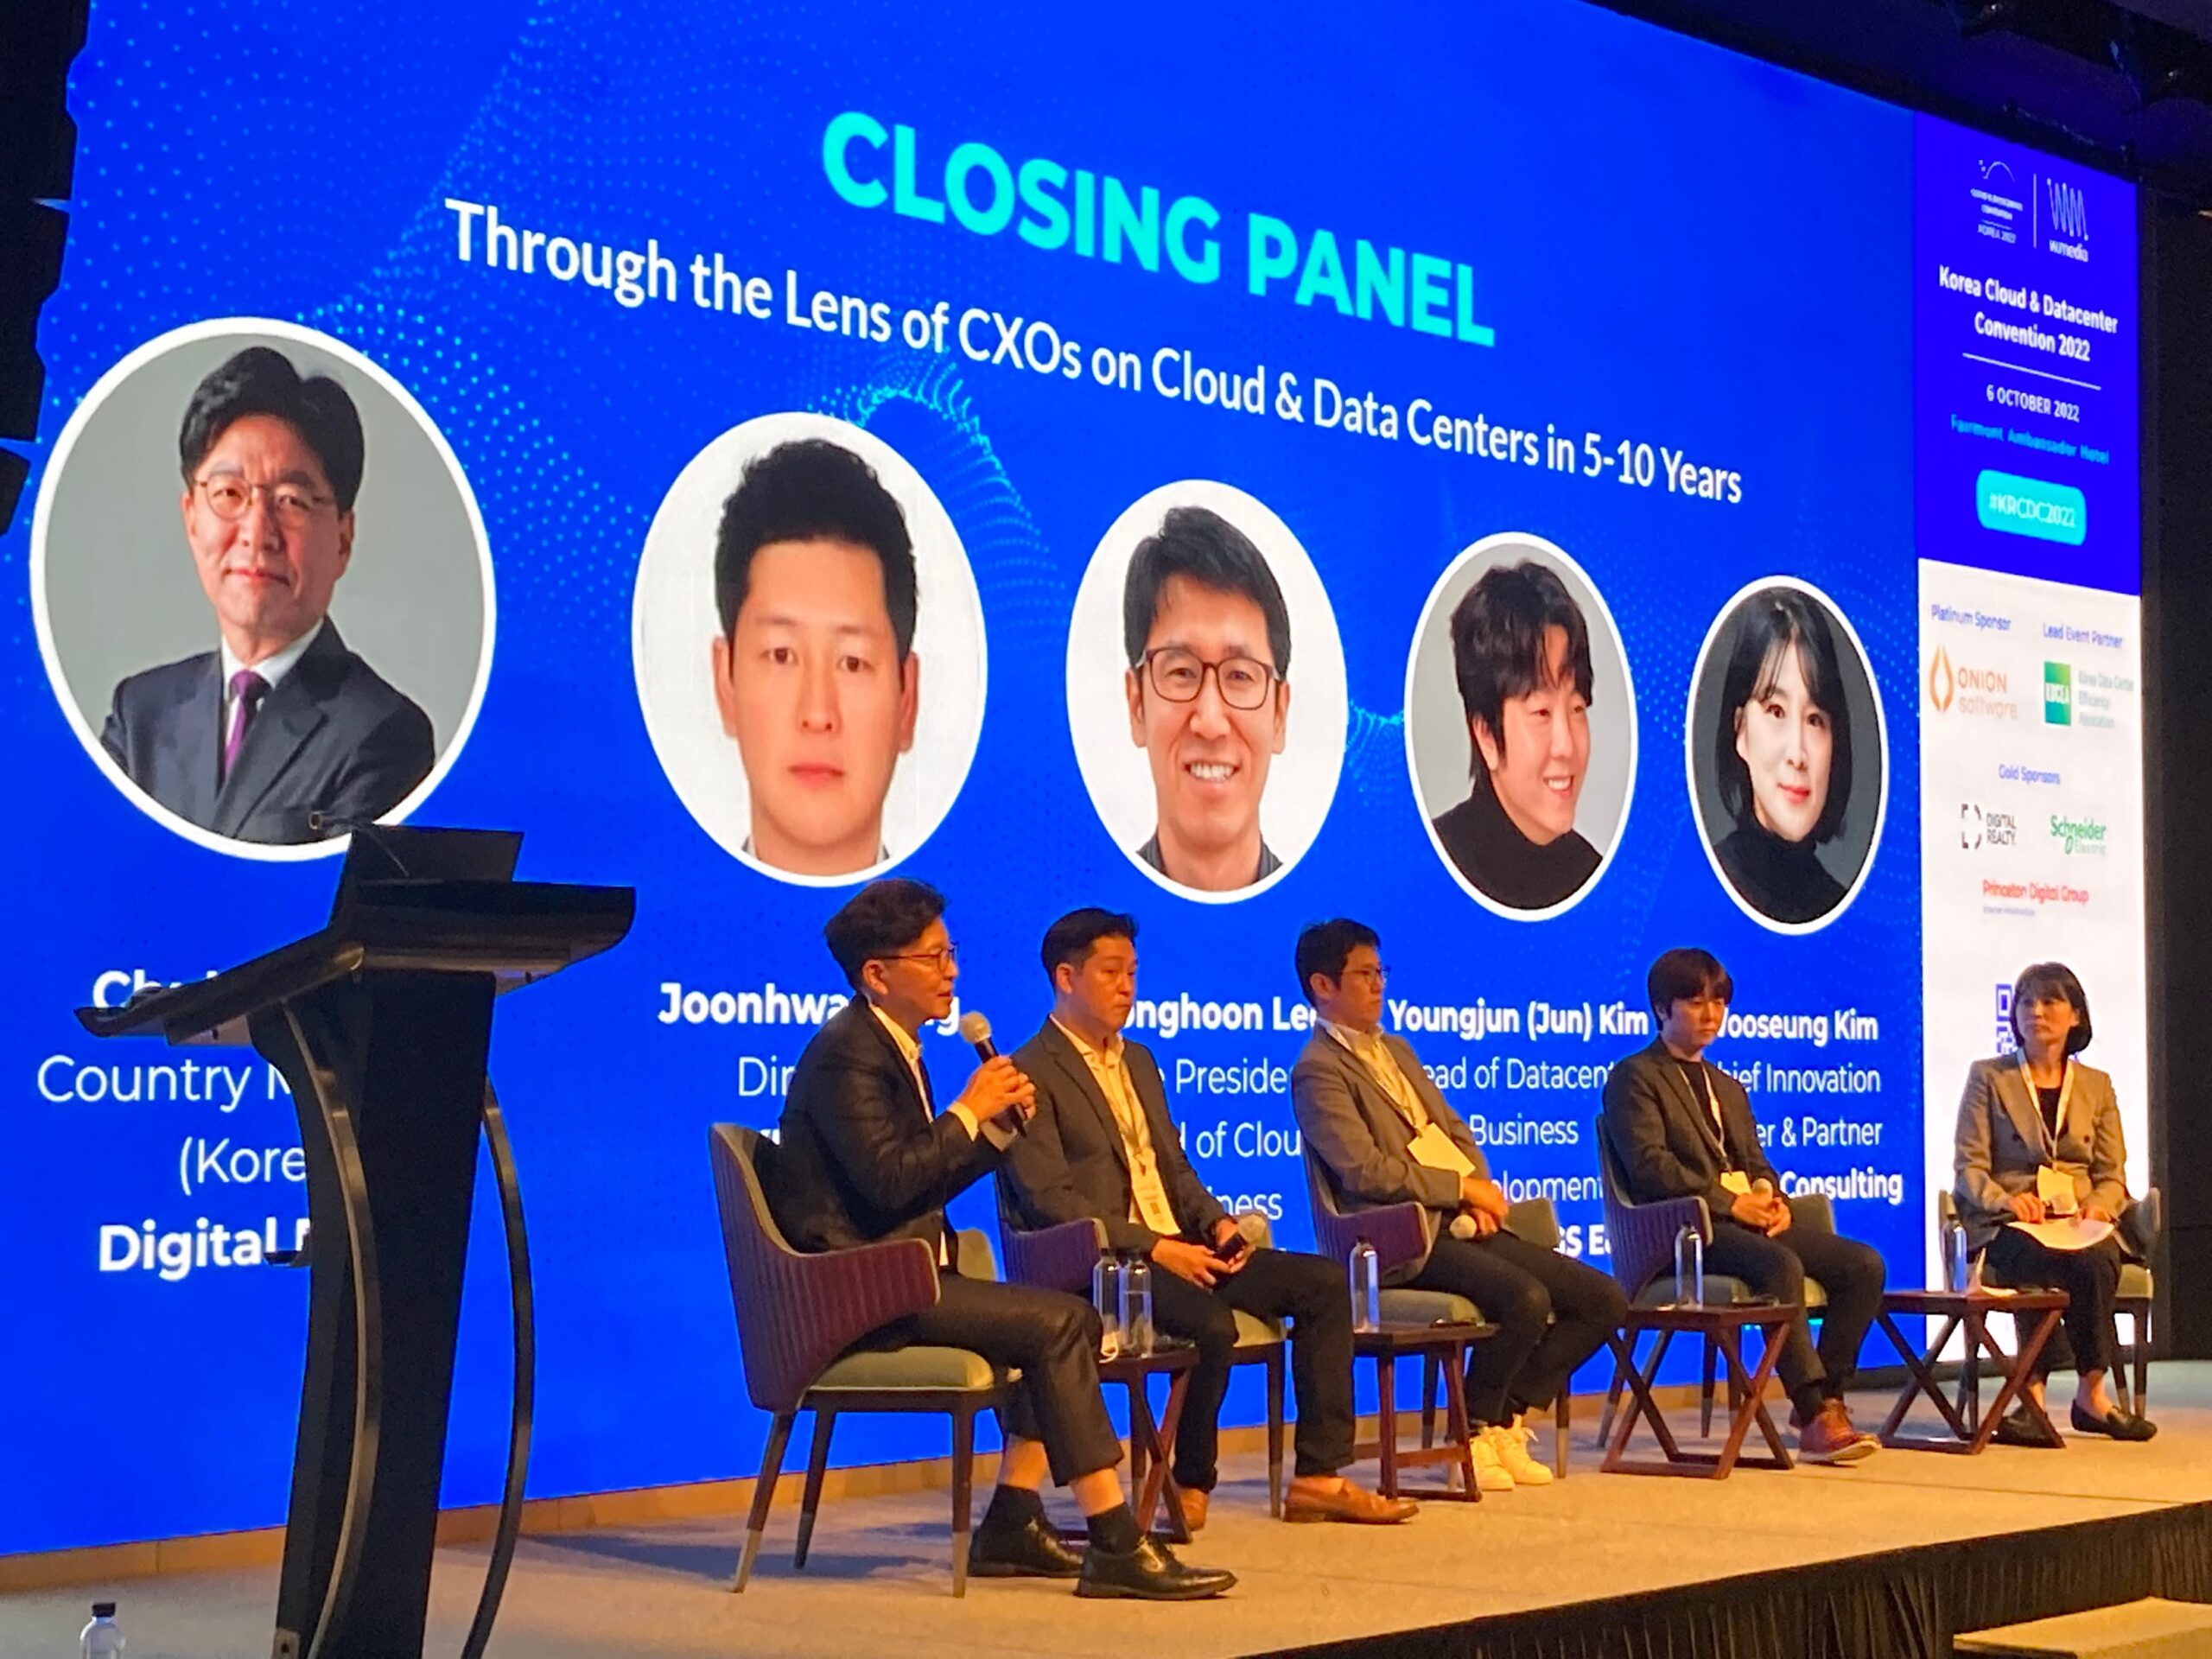 Digital Edge's Korean Country Manager shared his thoughts on the trends shaping the industry, from AI and automation to the growing importance of ESG.